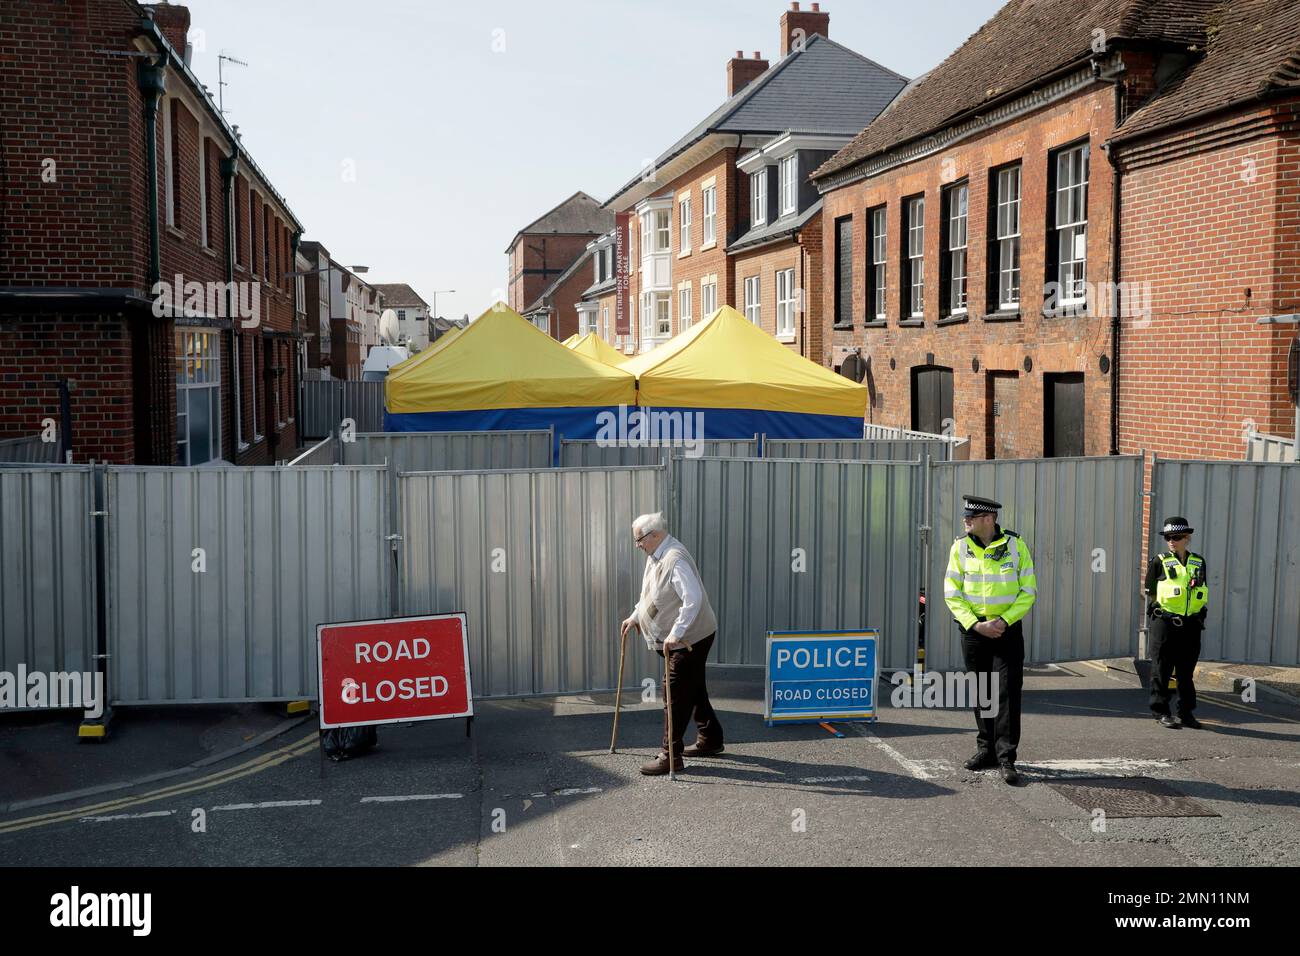 FILE - In this Friday, July 6, 2018 file photo, an elderly man walks by as British police officers guard metal fencing surrounding tents set up by search teams at the end of Rollestone Street, outside the location of the John Baker House for homeless people in Salisbury, England. British detectives investigating the poisoning of two people by the nerve agent Novichok in southern England said Friday, July 13, 2018 that scientists have found the source of the deadly substance. (AP Photo/Matt Dunham, File) Stock Photo